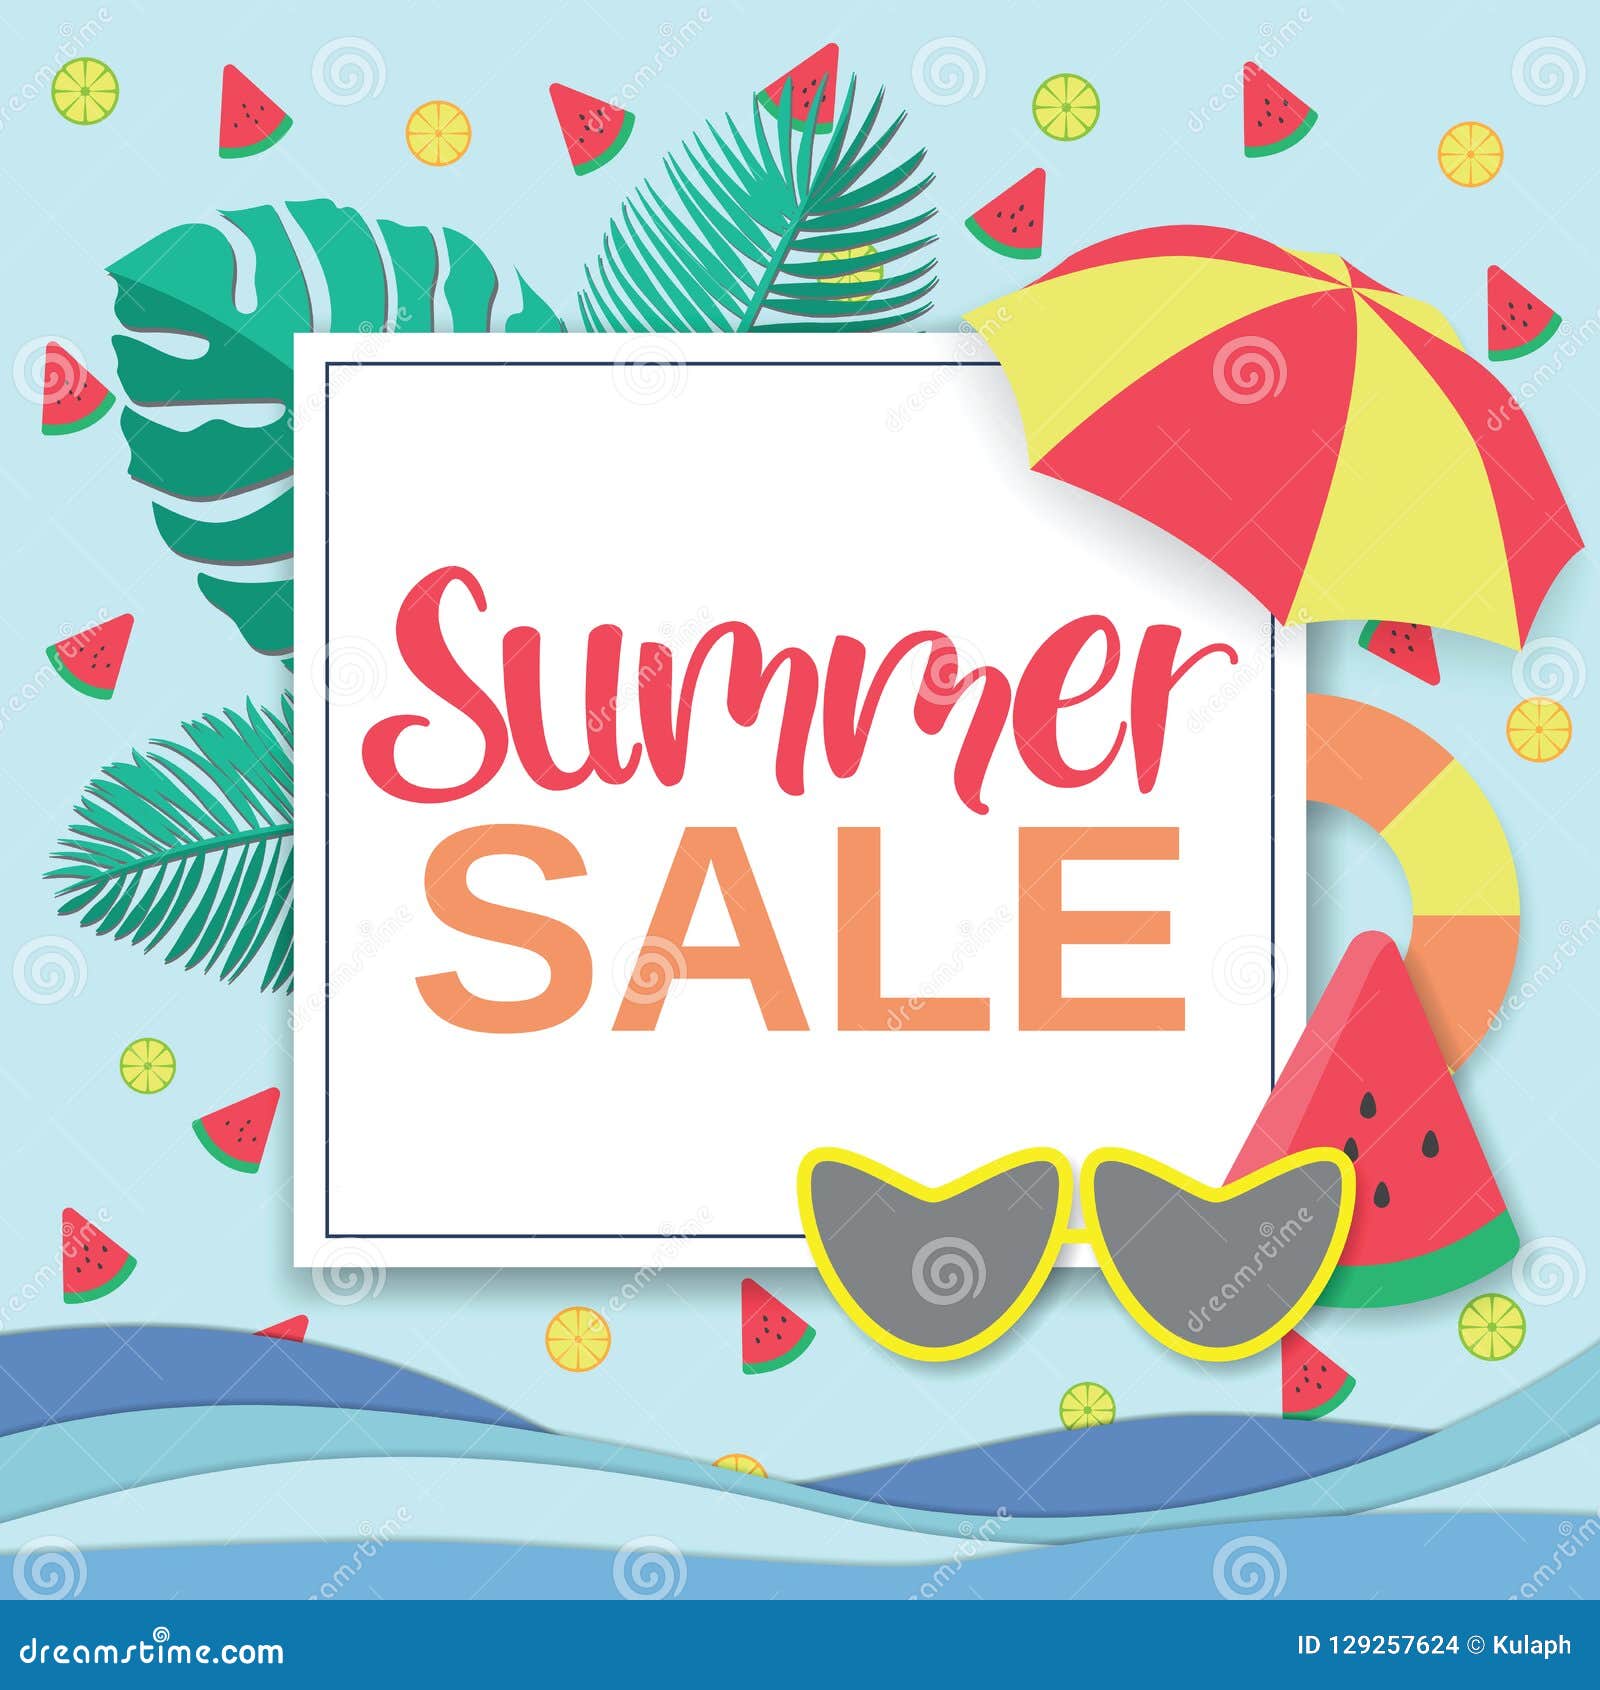 https://thumbs.dreamstime.com/z/summer-sale-banner-poster-template-colorfull-summer-theme-summer-sale-banner-poster-template-summer-theme-129257624.jpg